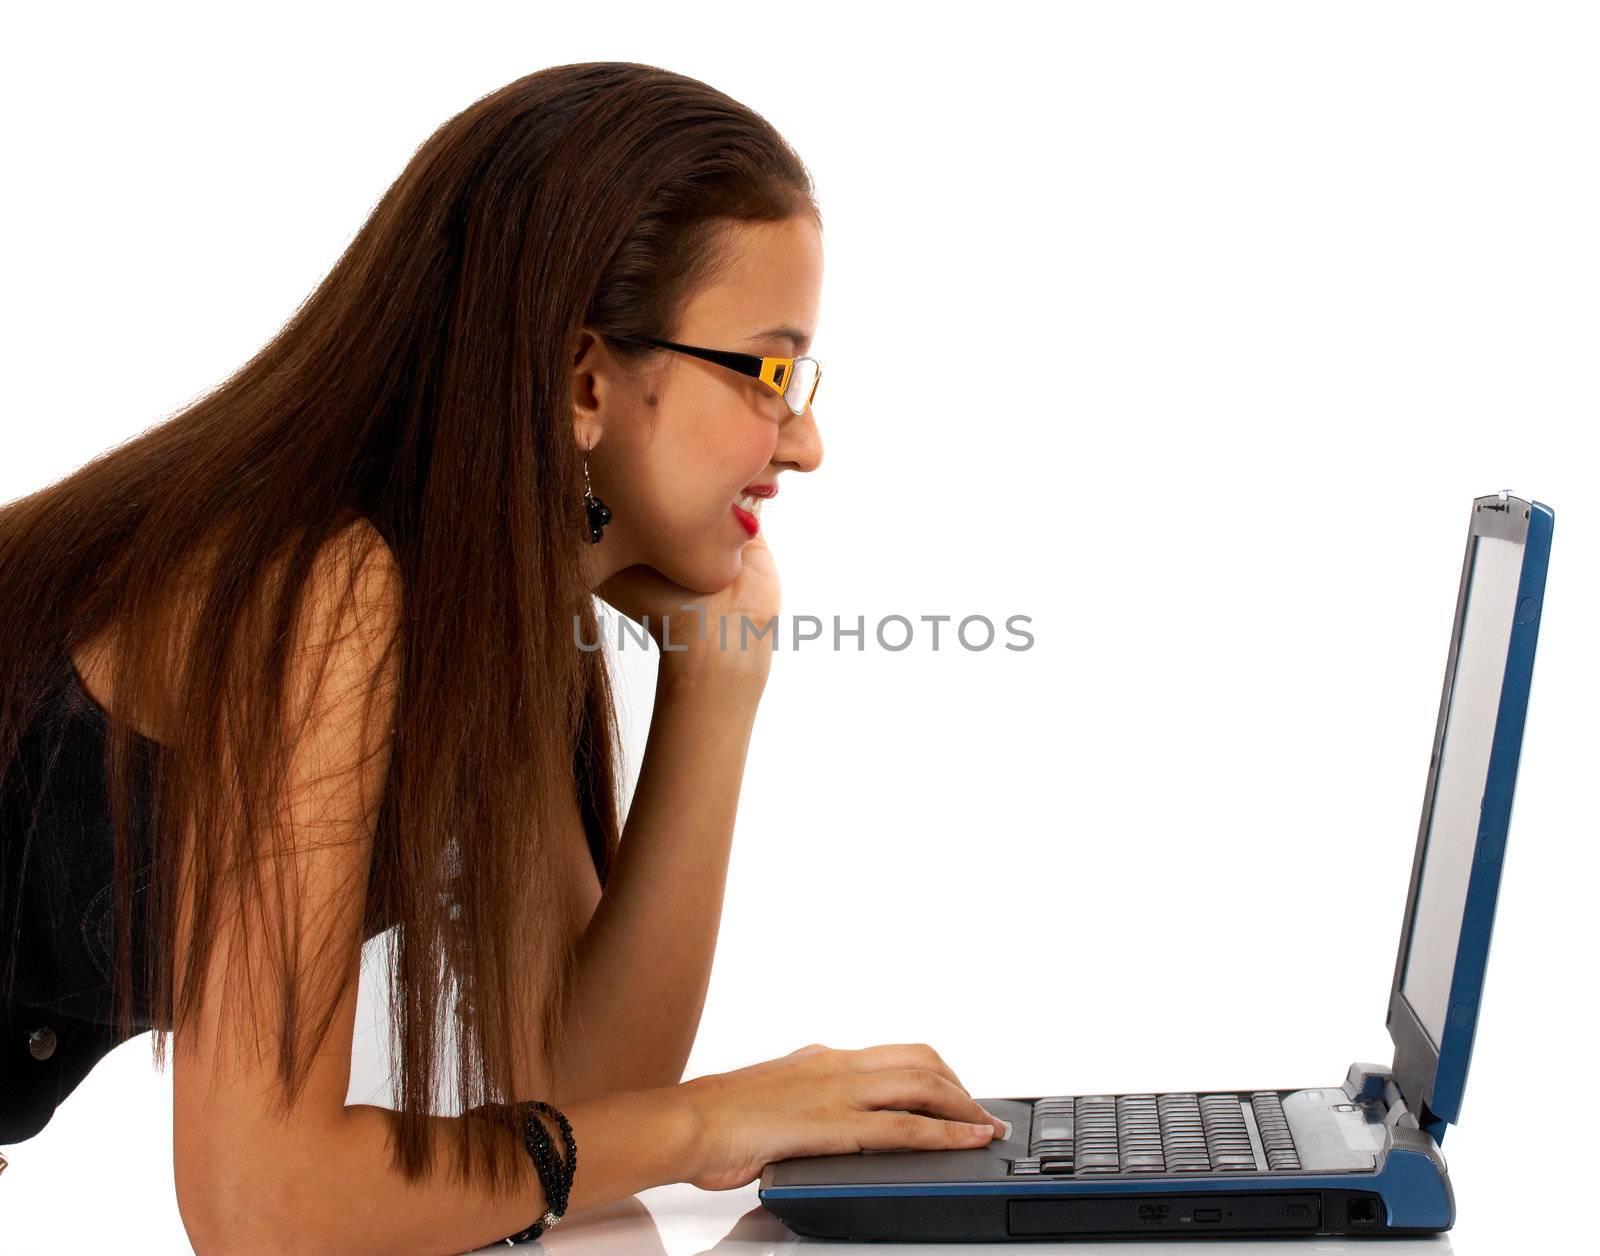 Young Woman Using A Computer To View Internet